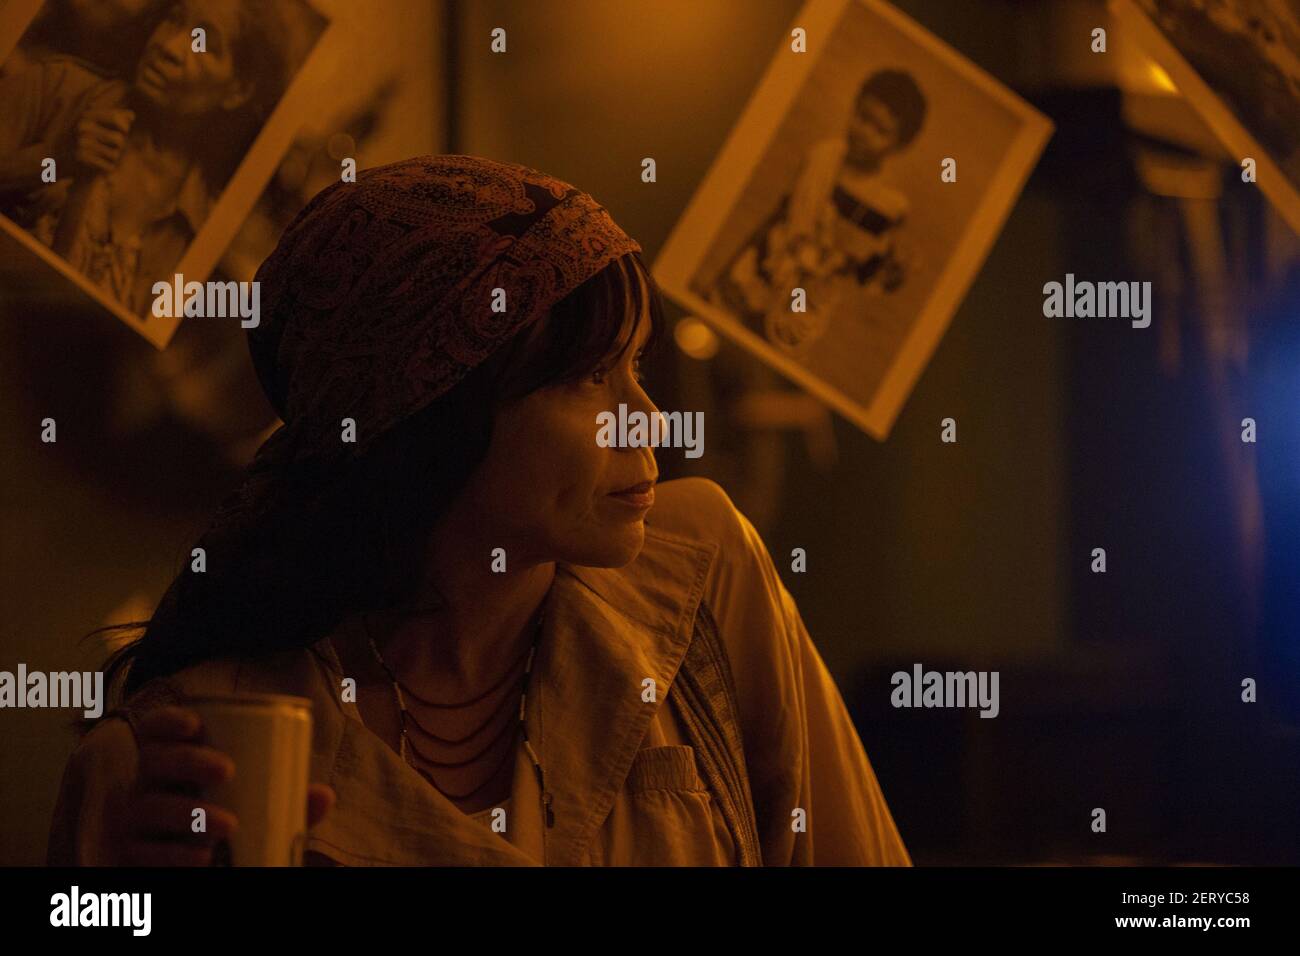 ROSIE PEREZ IN THE LAST THING HE WANTED (2020), REGIE: DEE REES. Quelle: THEFYZZ / Album Stockfoto